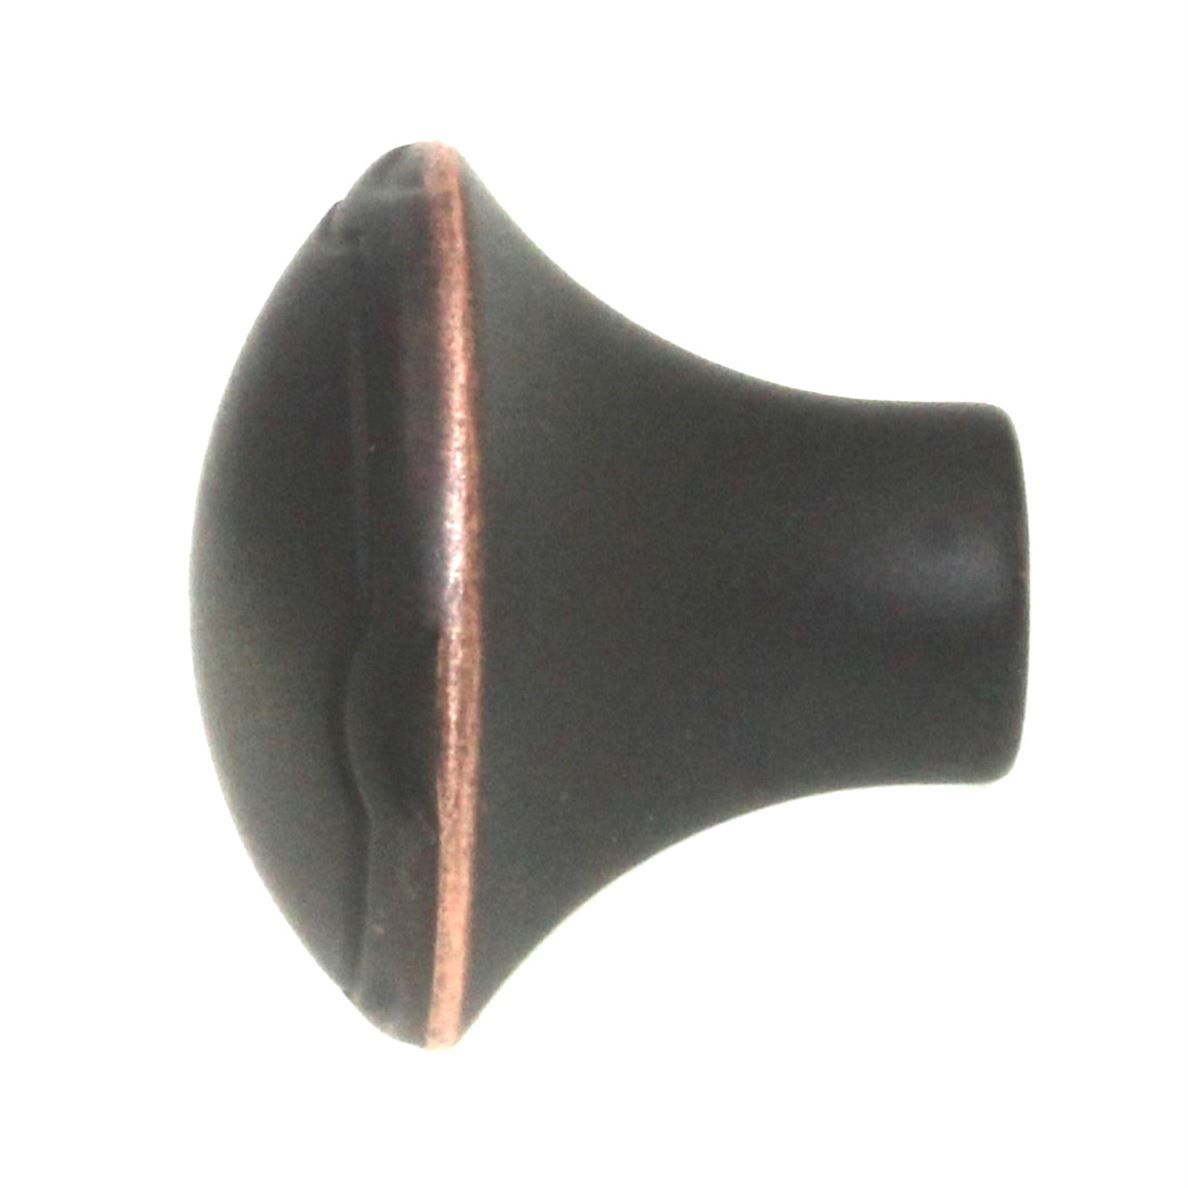 Liberty Athens Bronze Copper Highlights 1 1/4" Theo Cabinet Knob P23120-VBC-CP